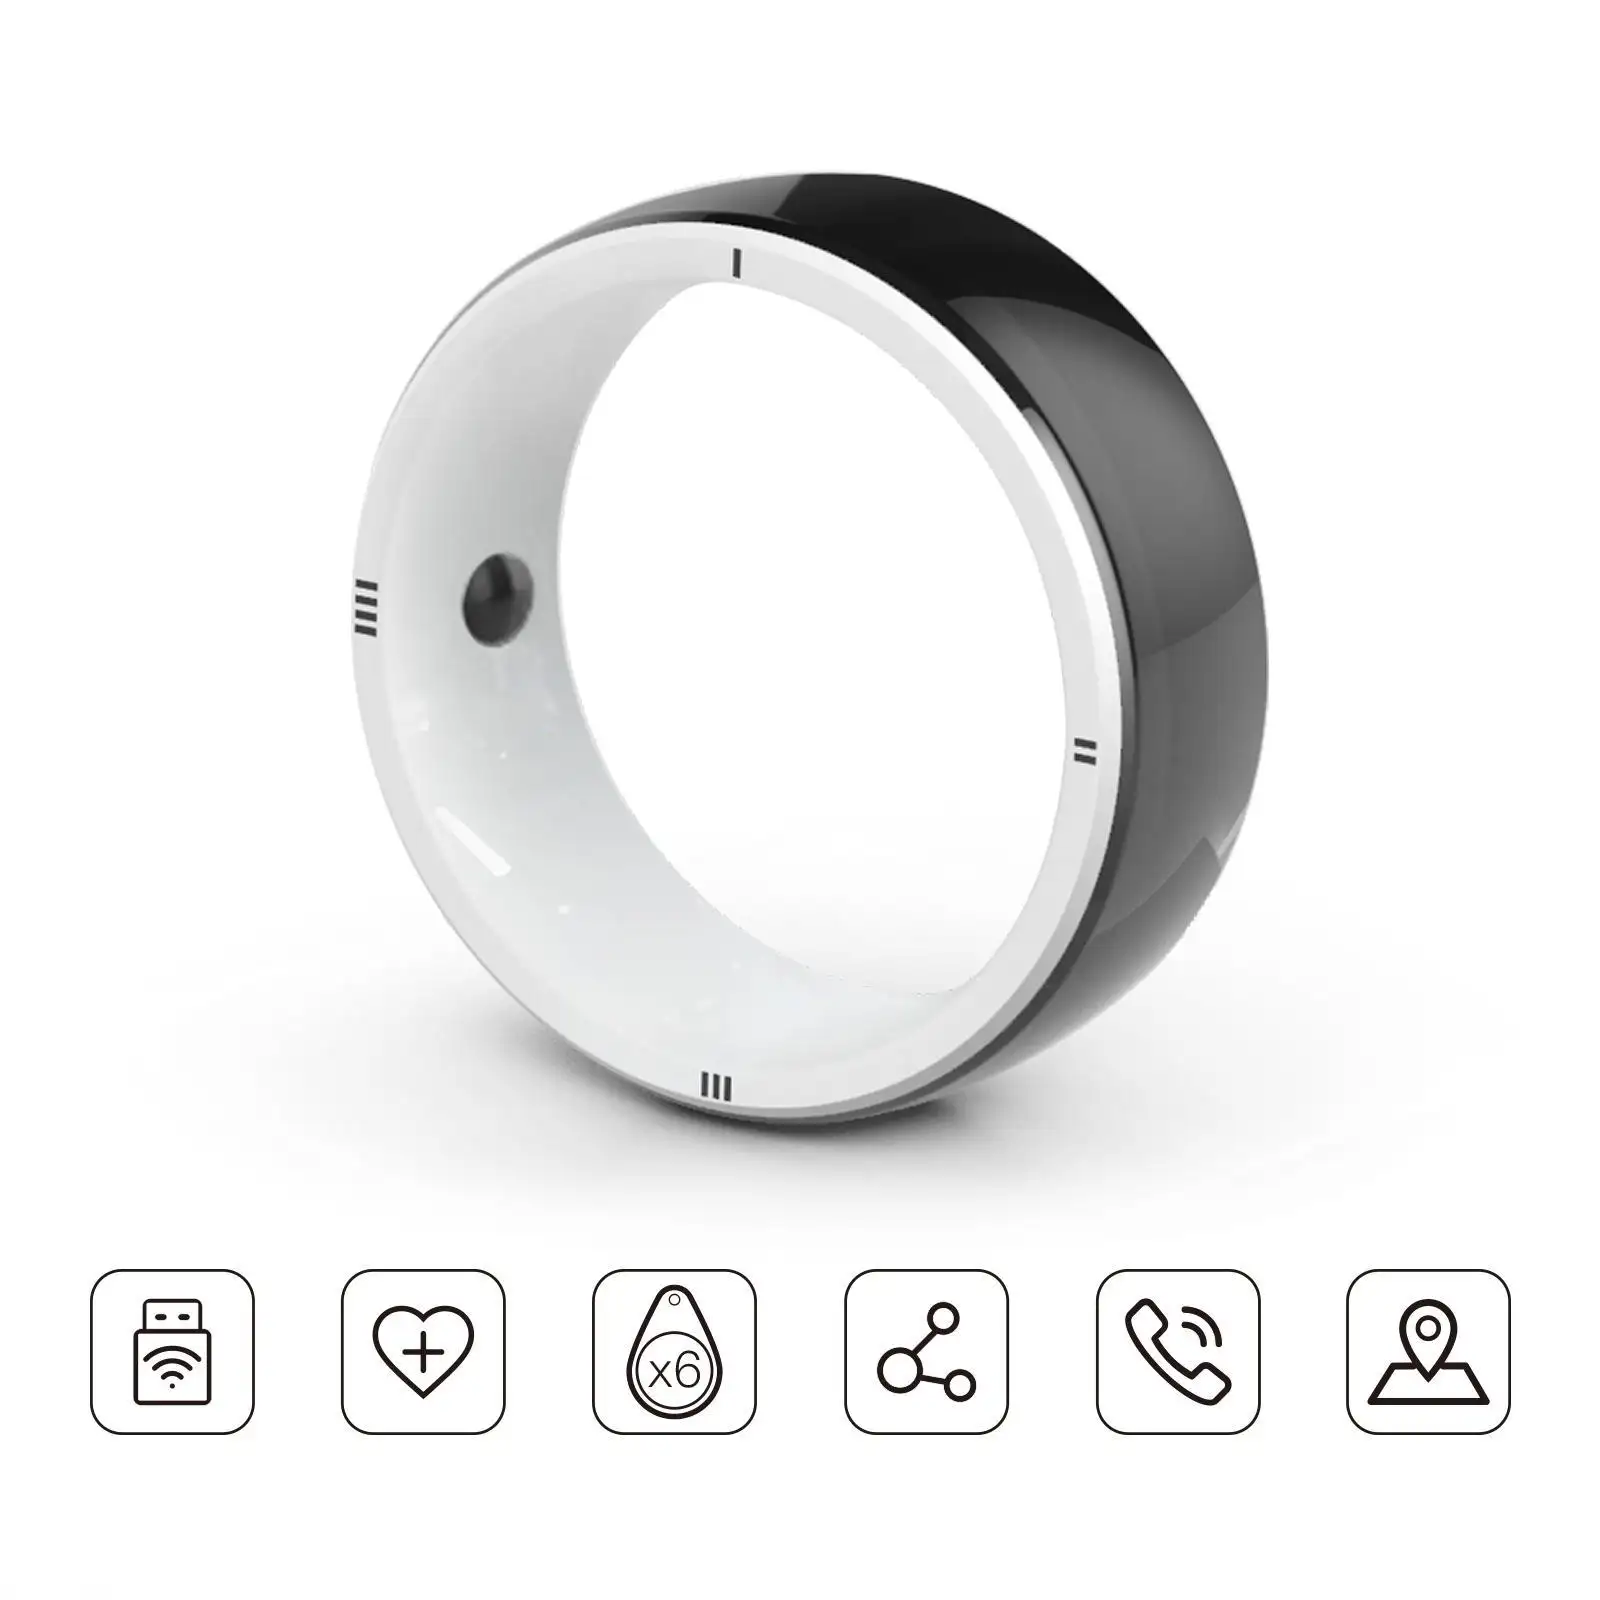 JAKCOM R5 Smart Ring New Smart Ring Super value than best tower speakers hd blu ray player type c to type c hub 2 in 1